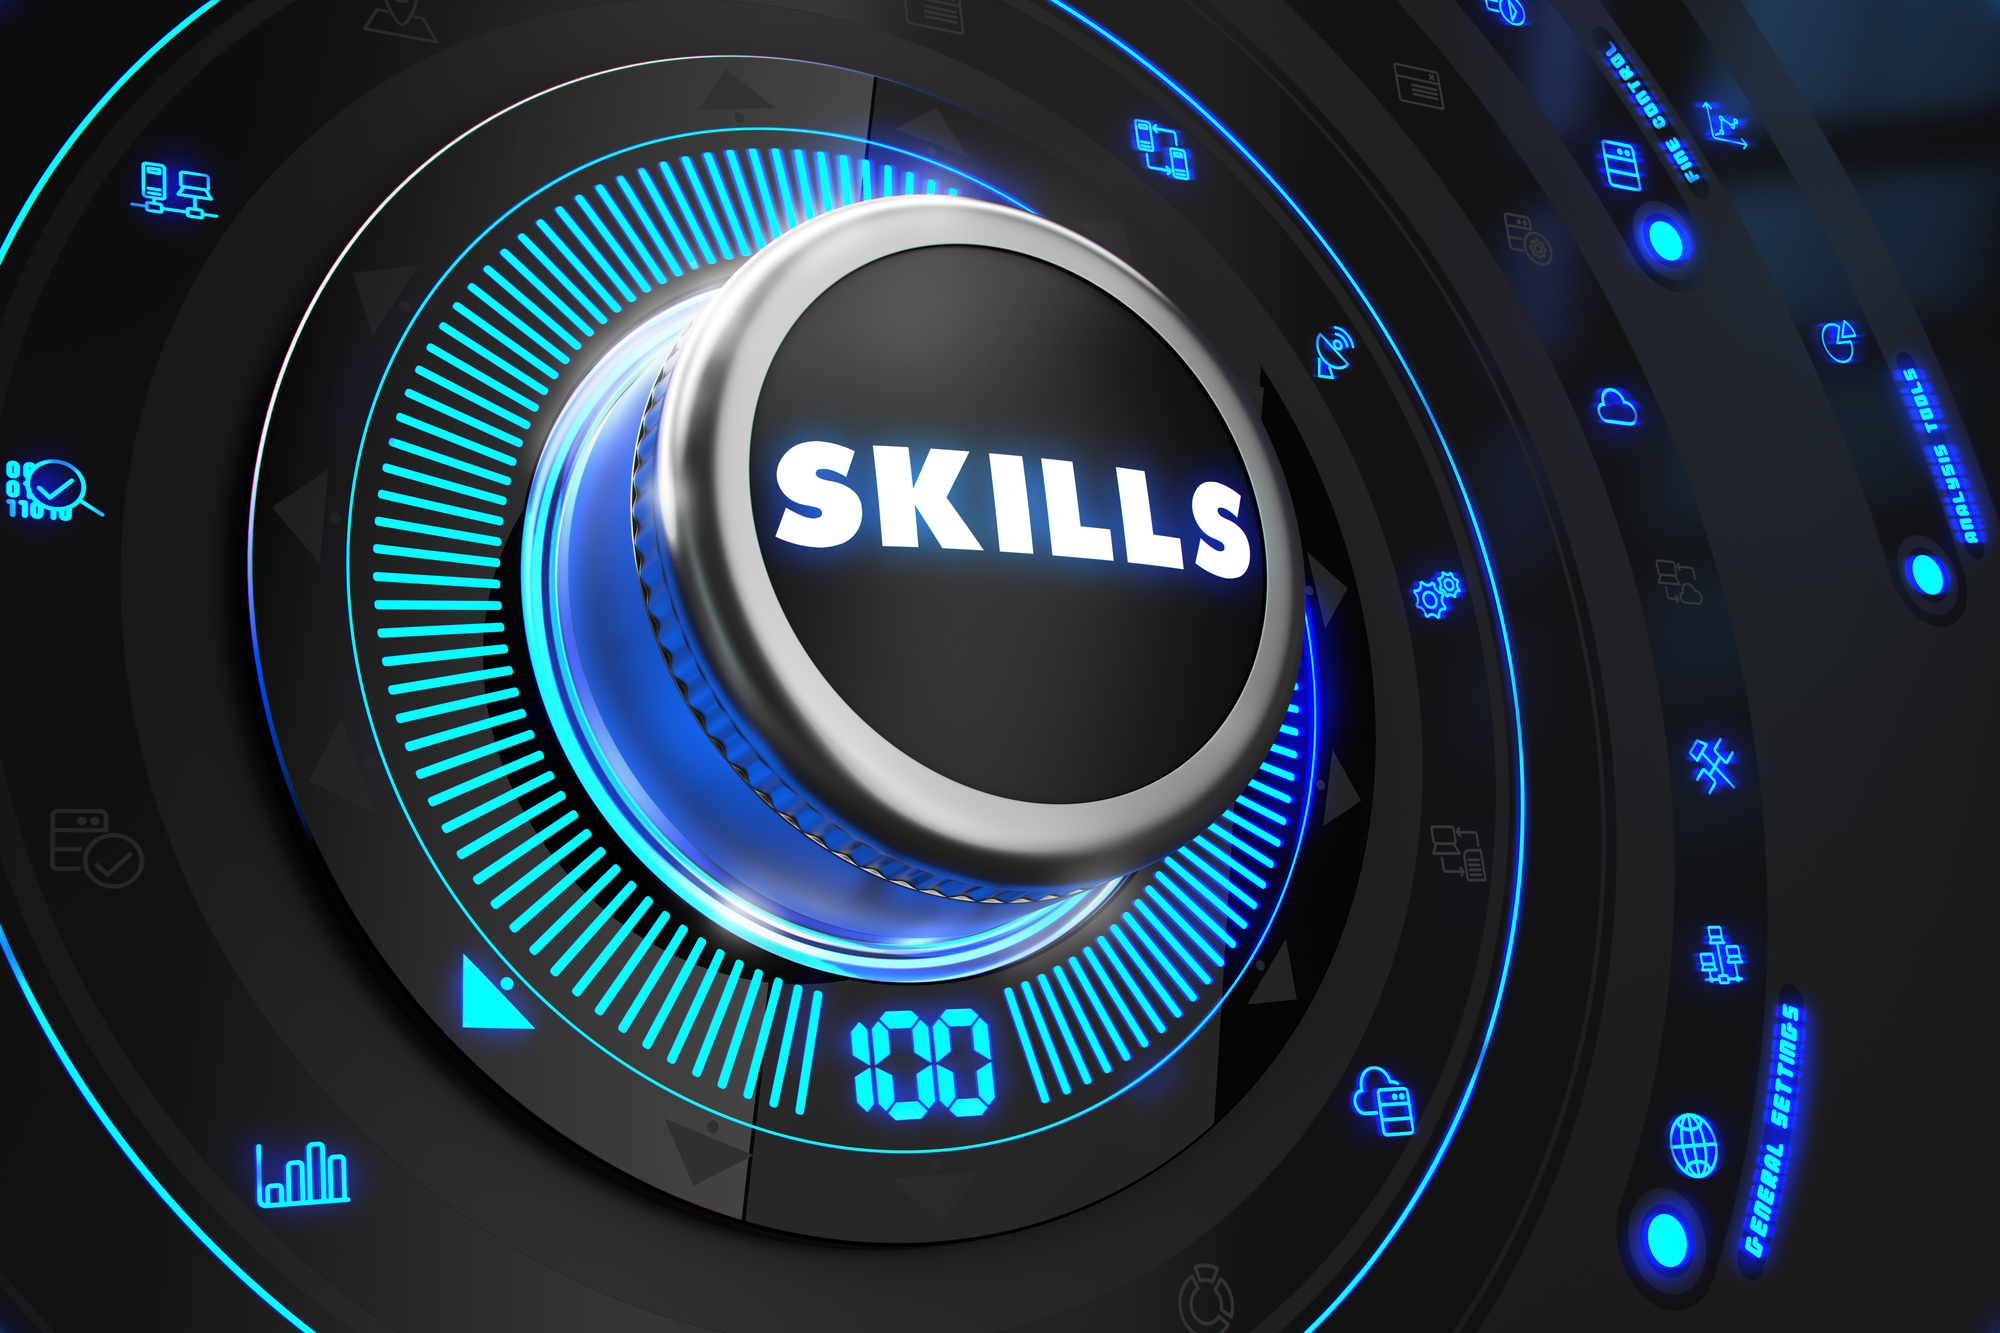 What Skills Are You Going To Master in 2018?